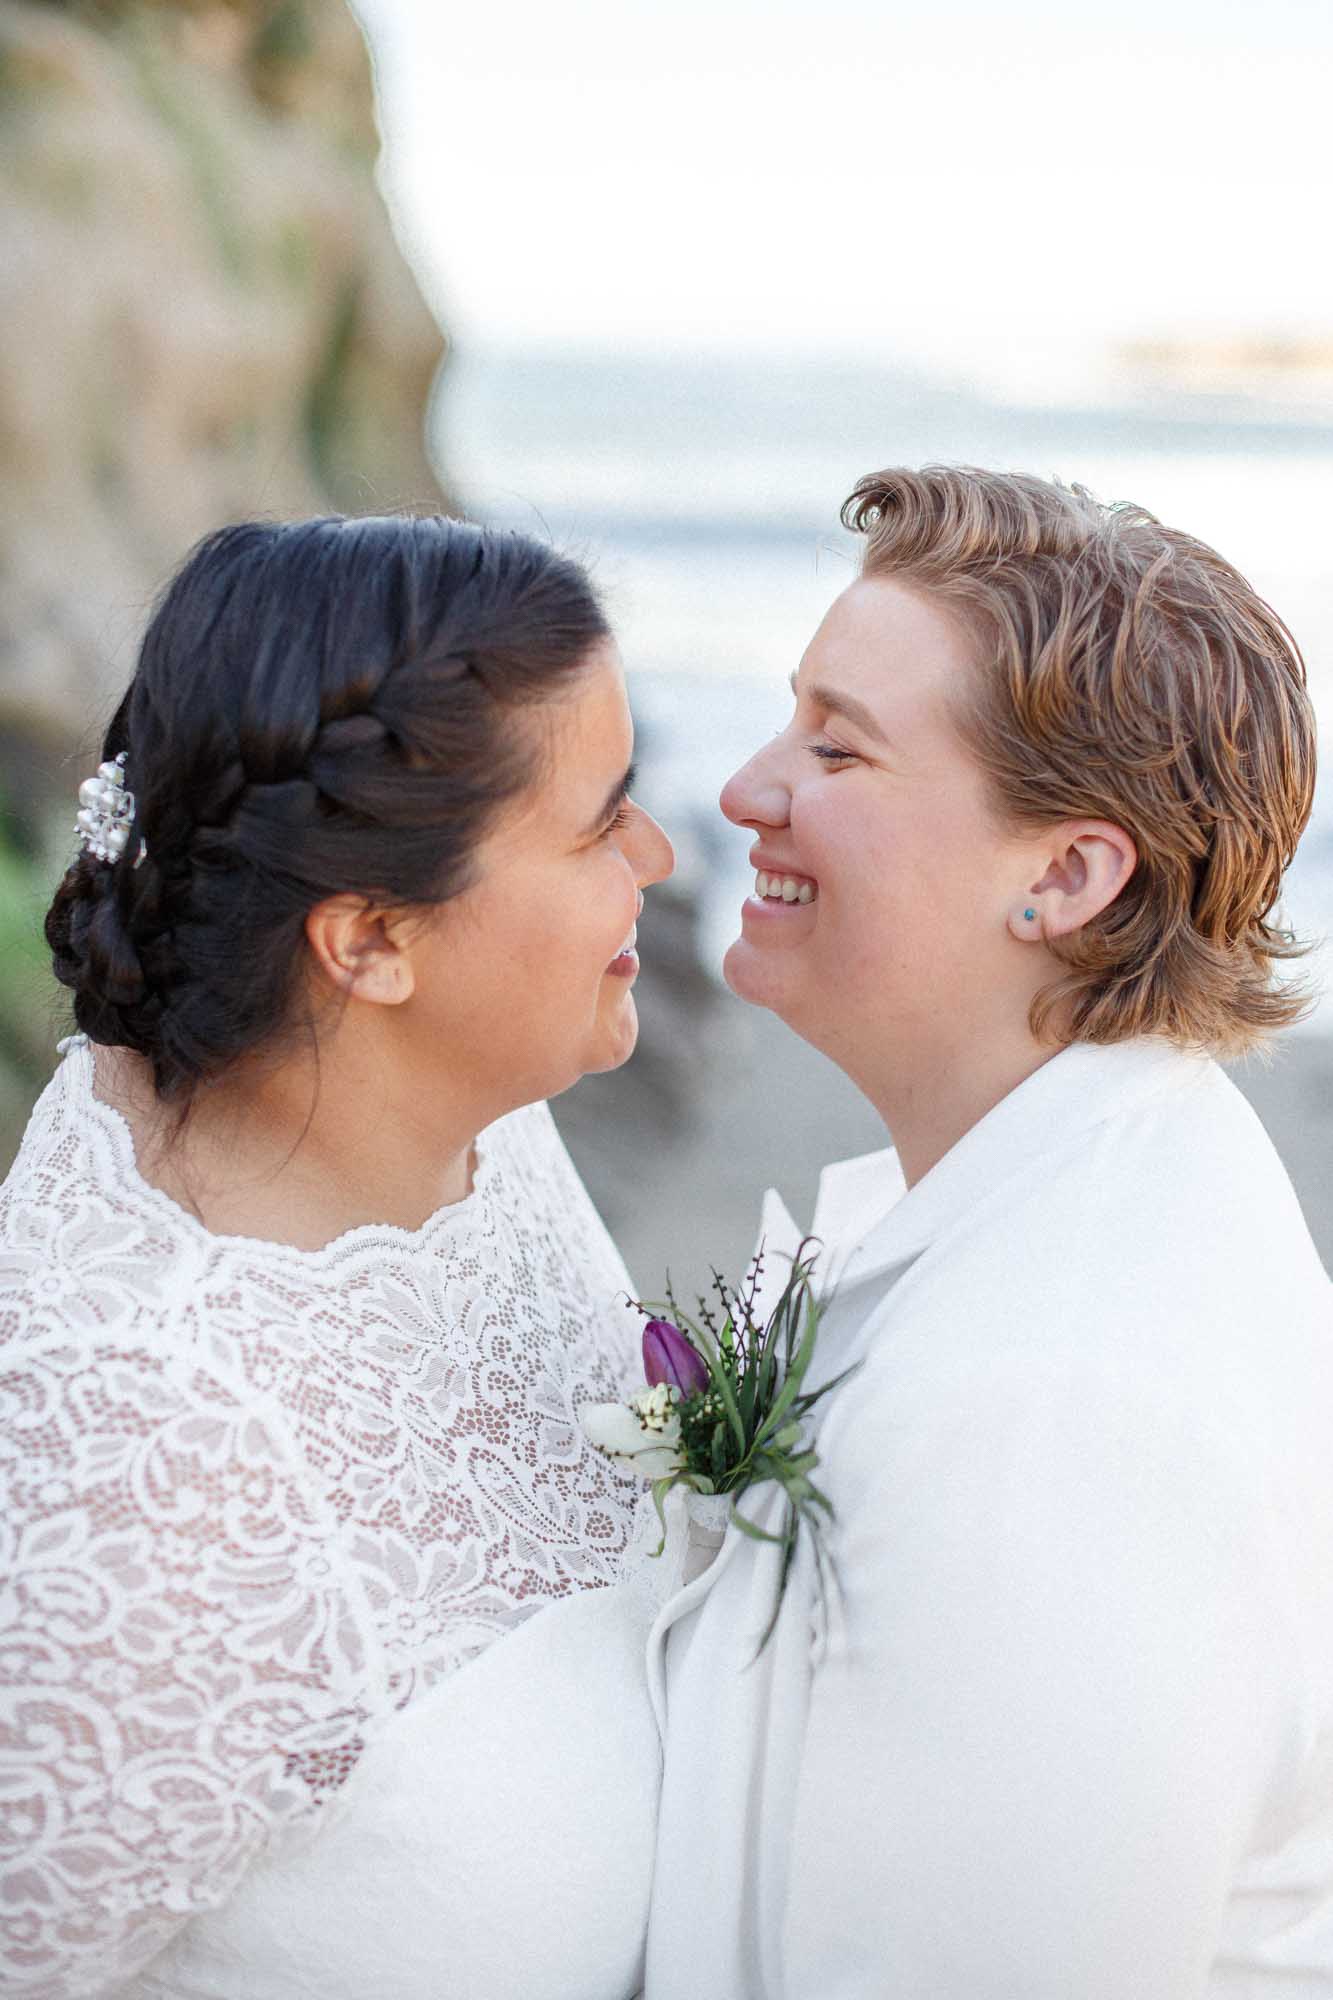 Santa Cruz courthouse elopement followed by beach photos | Delgado Photo Co | Featured on Equally Wed, the leading LGBTQ+ wedding magazine